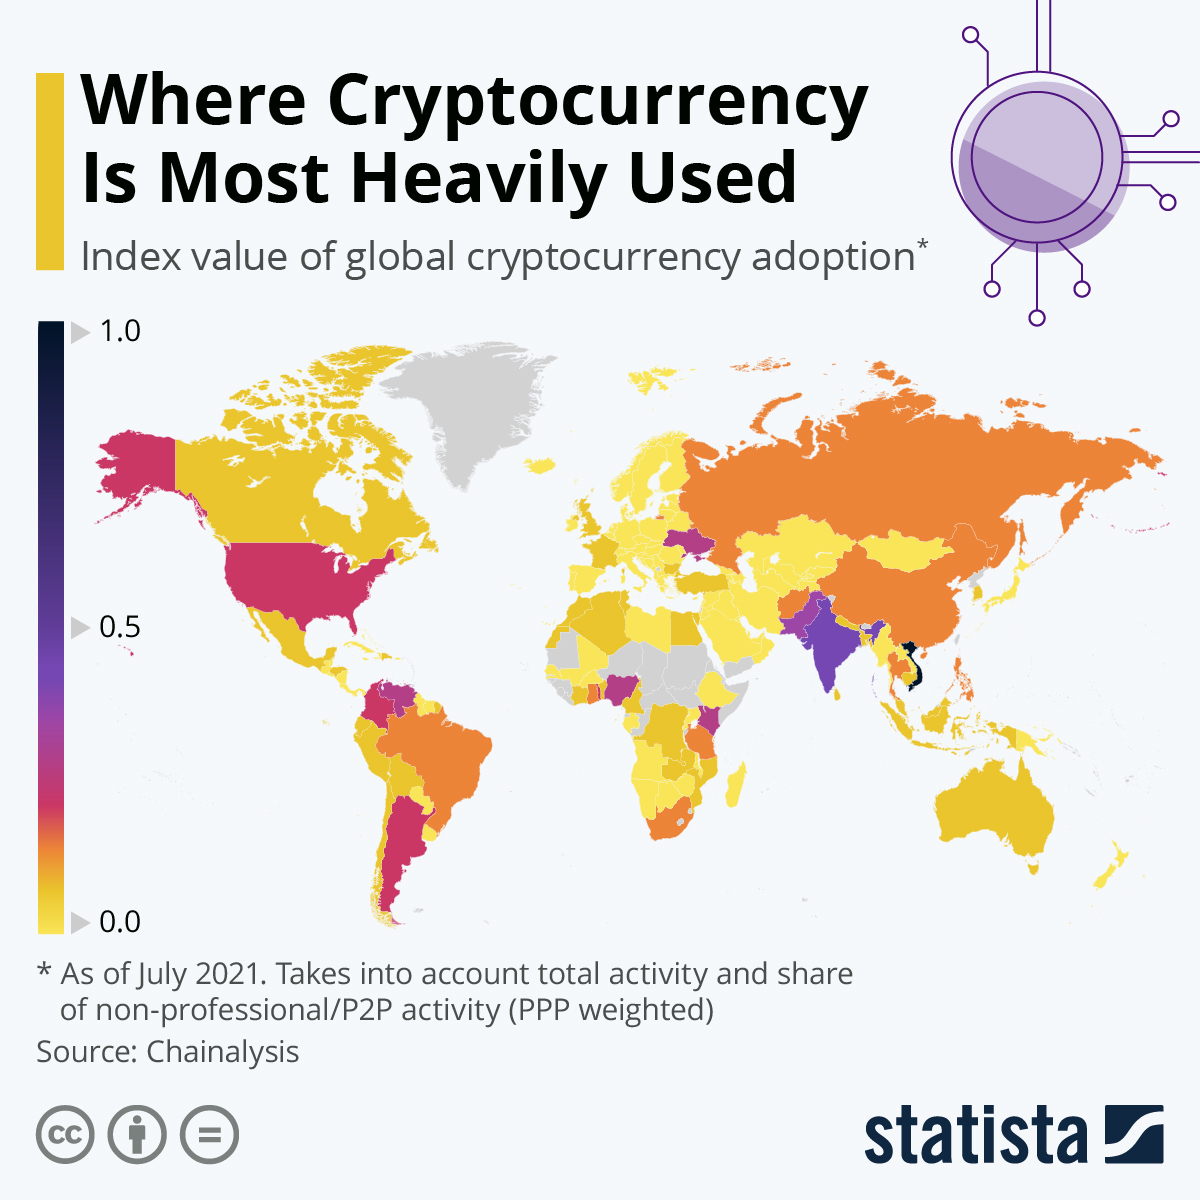 63+ Cryptocurrency Statistics, Facts & Trends ()